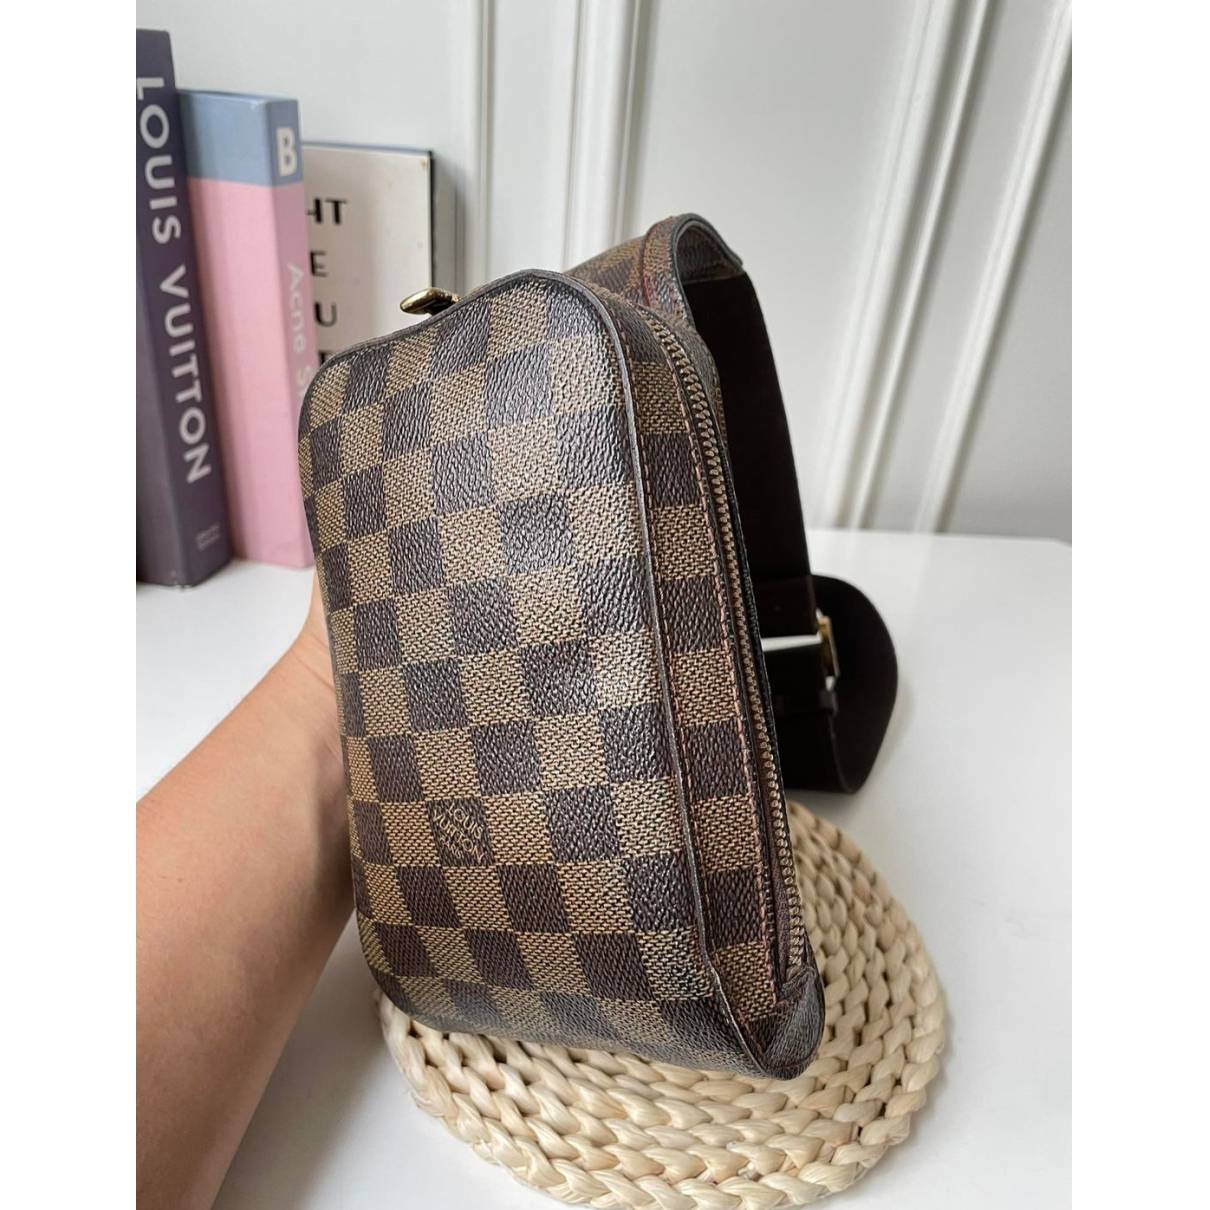 Is the LV Geronimos really available in this damier graphite print